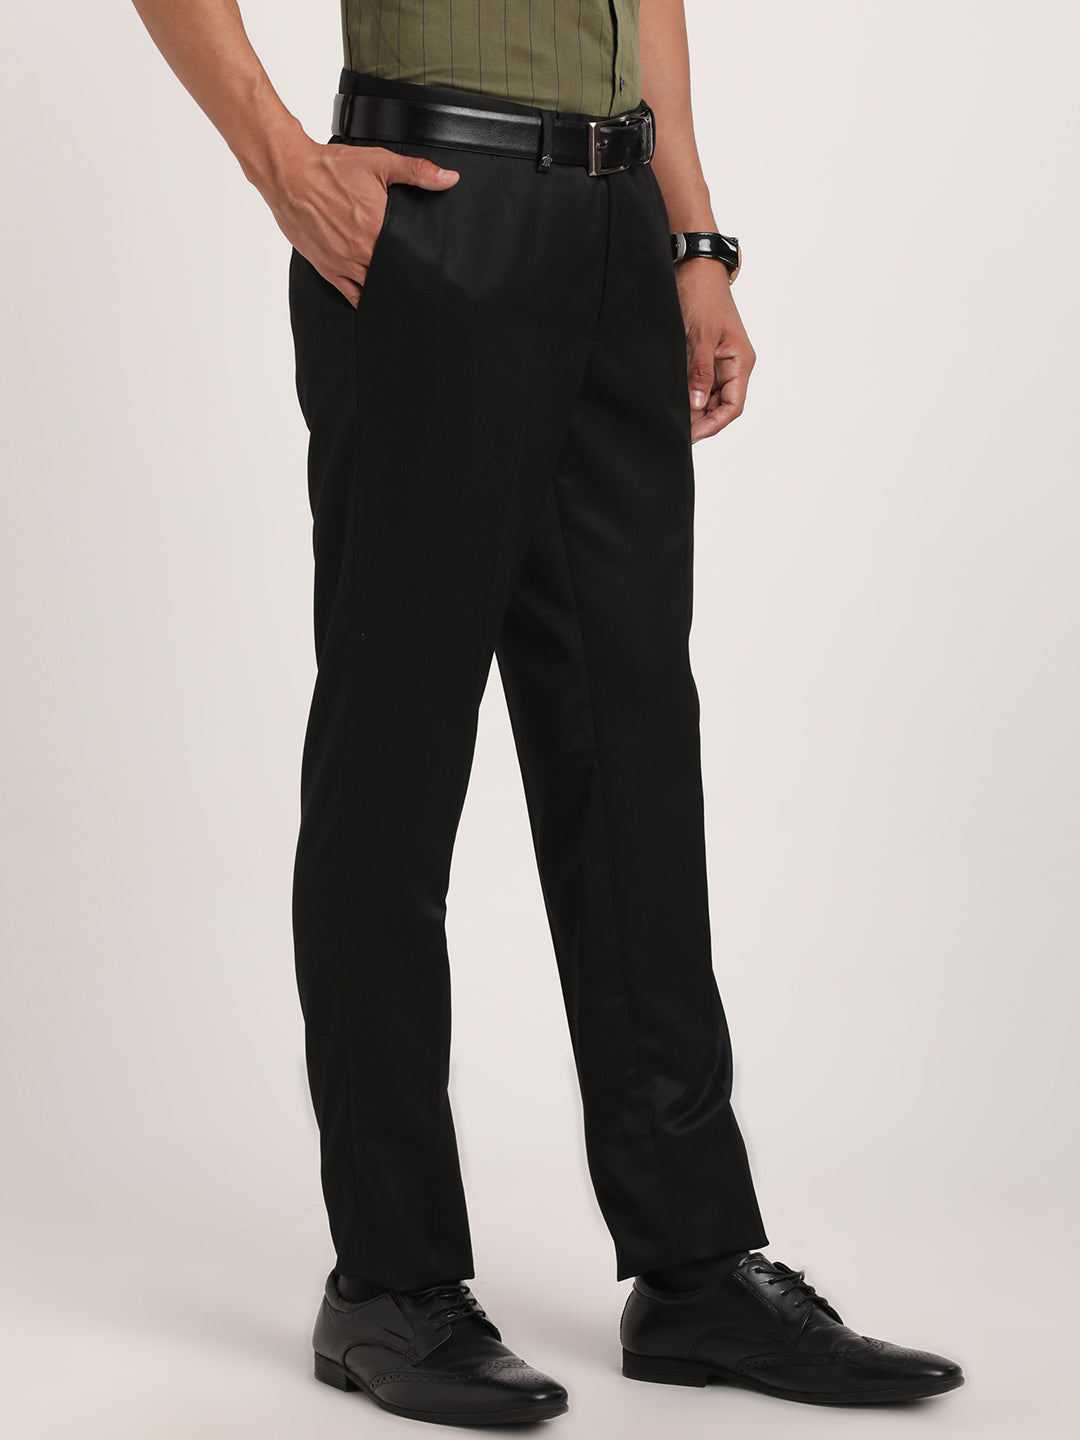 100% Stylish Interlock Polyester Formal Trousers for Men Stretchable, Formal  Pant for Boys with Contrast Panelling Sweatpants